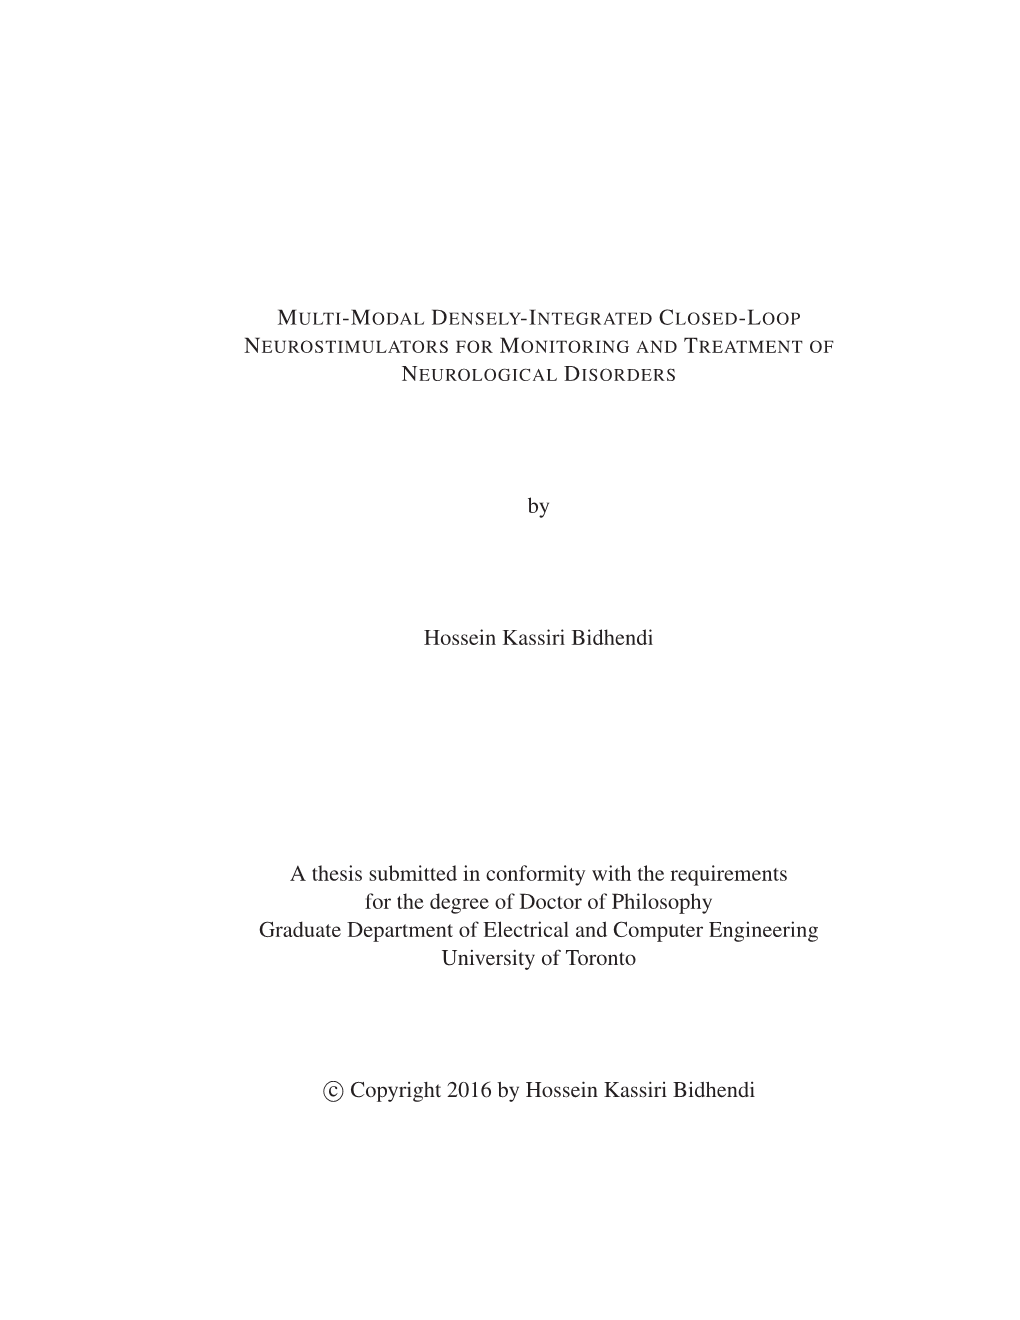 By Hossein Kassiri Bidhendi a Thesis Submitted in Conformity